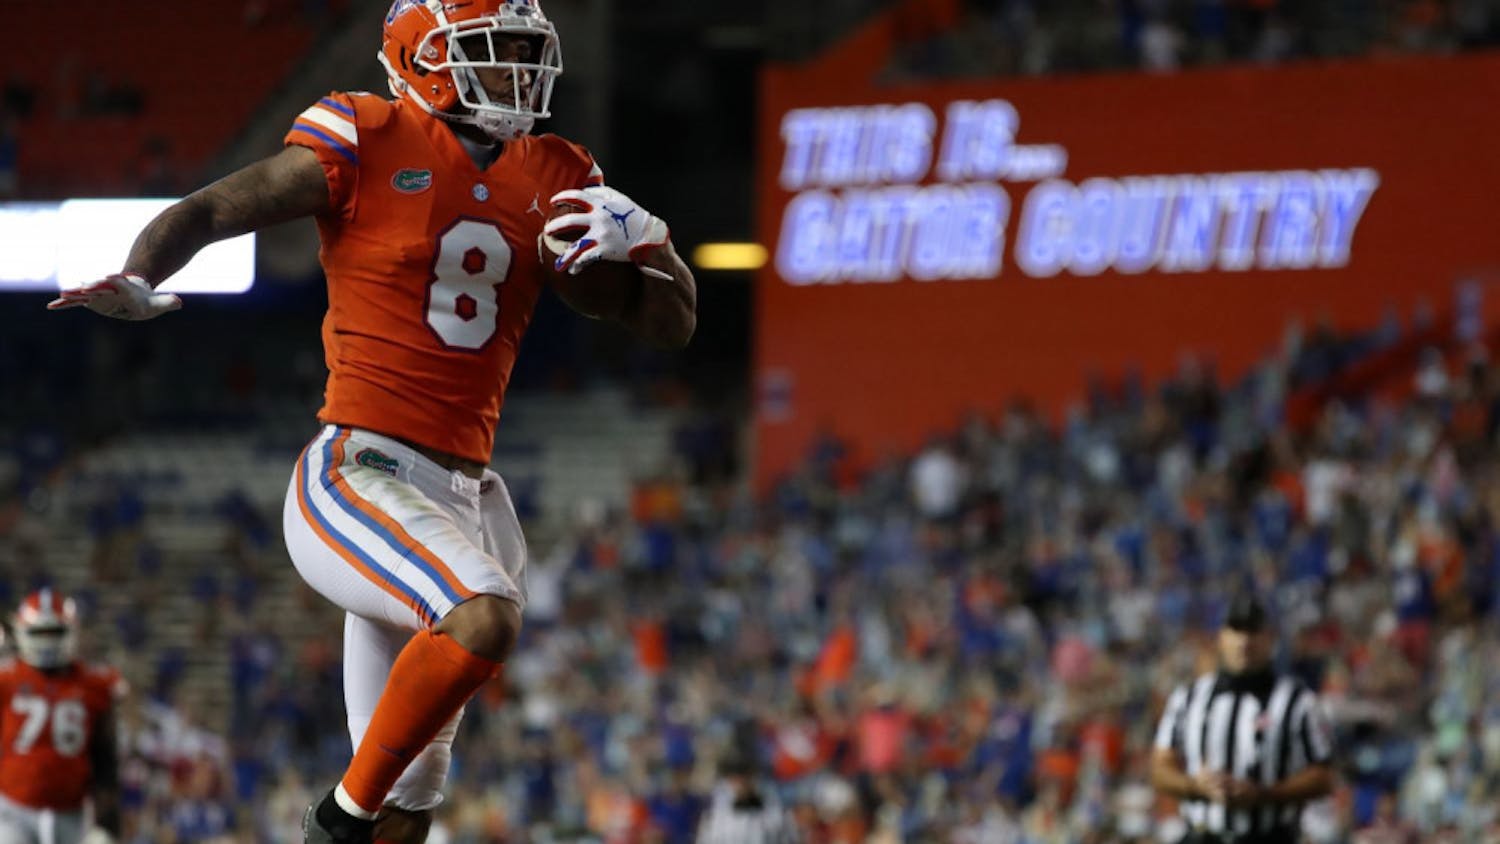 Florida wide receiver Trevon Grimes at Saturday night’s game versus Arkansas at The Swamp. Grimes led the team in reception yards on Nov. 14, amassing 109 yards on six catches.